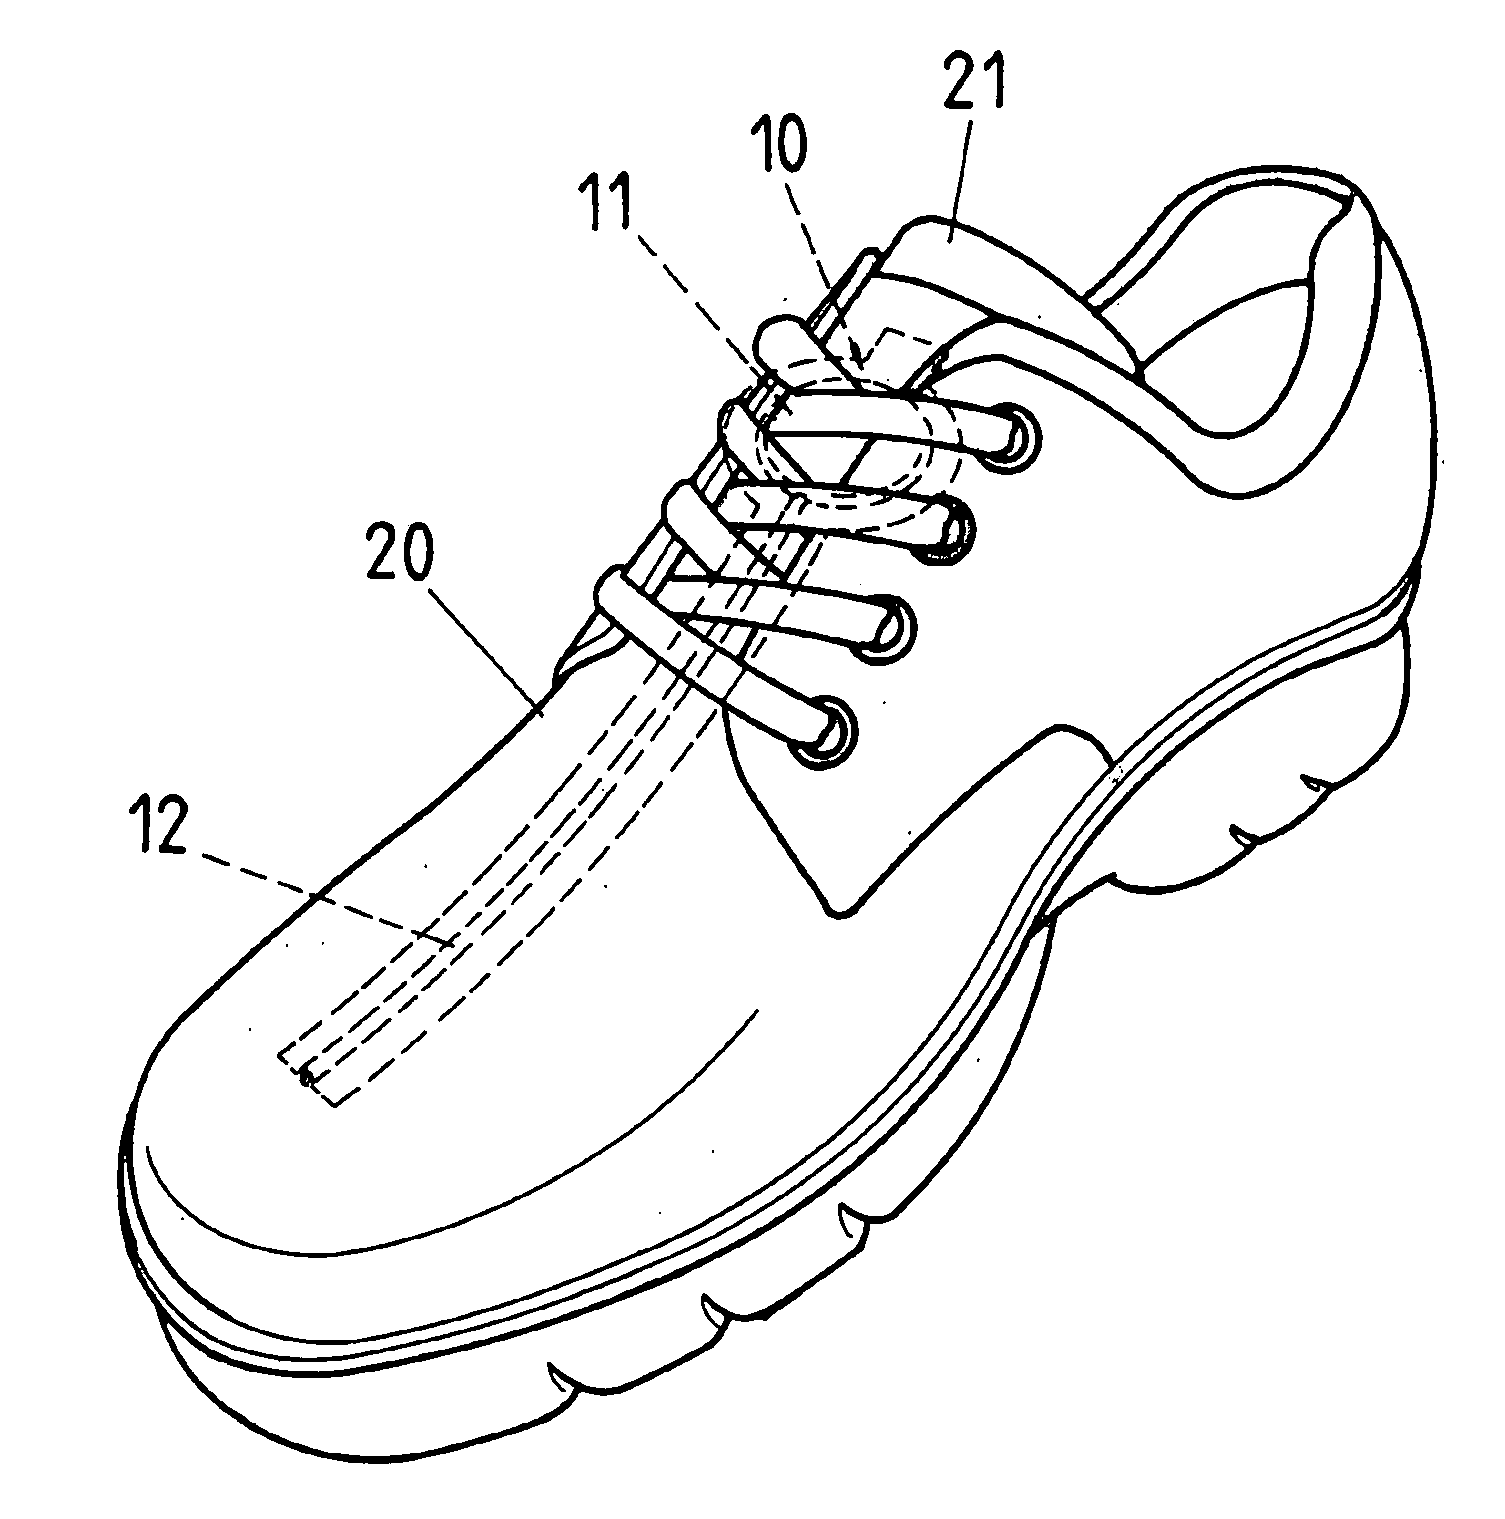 Touch-control deodorant device for shoes